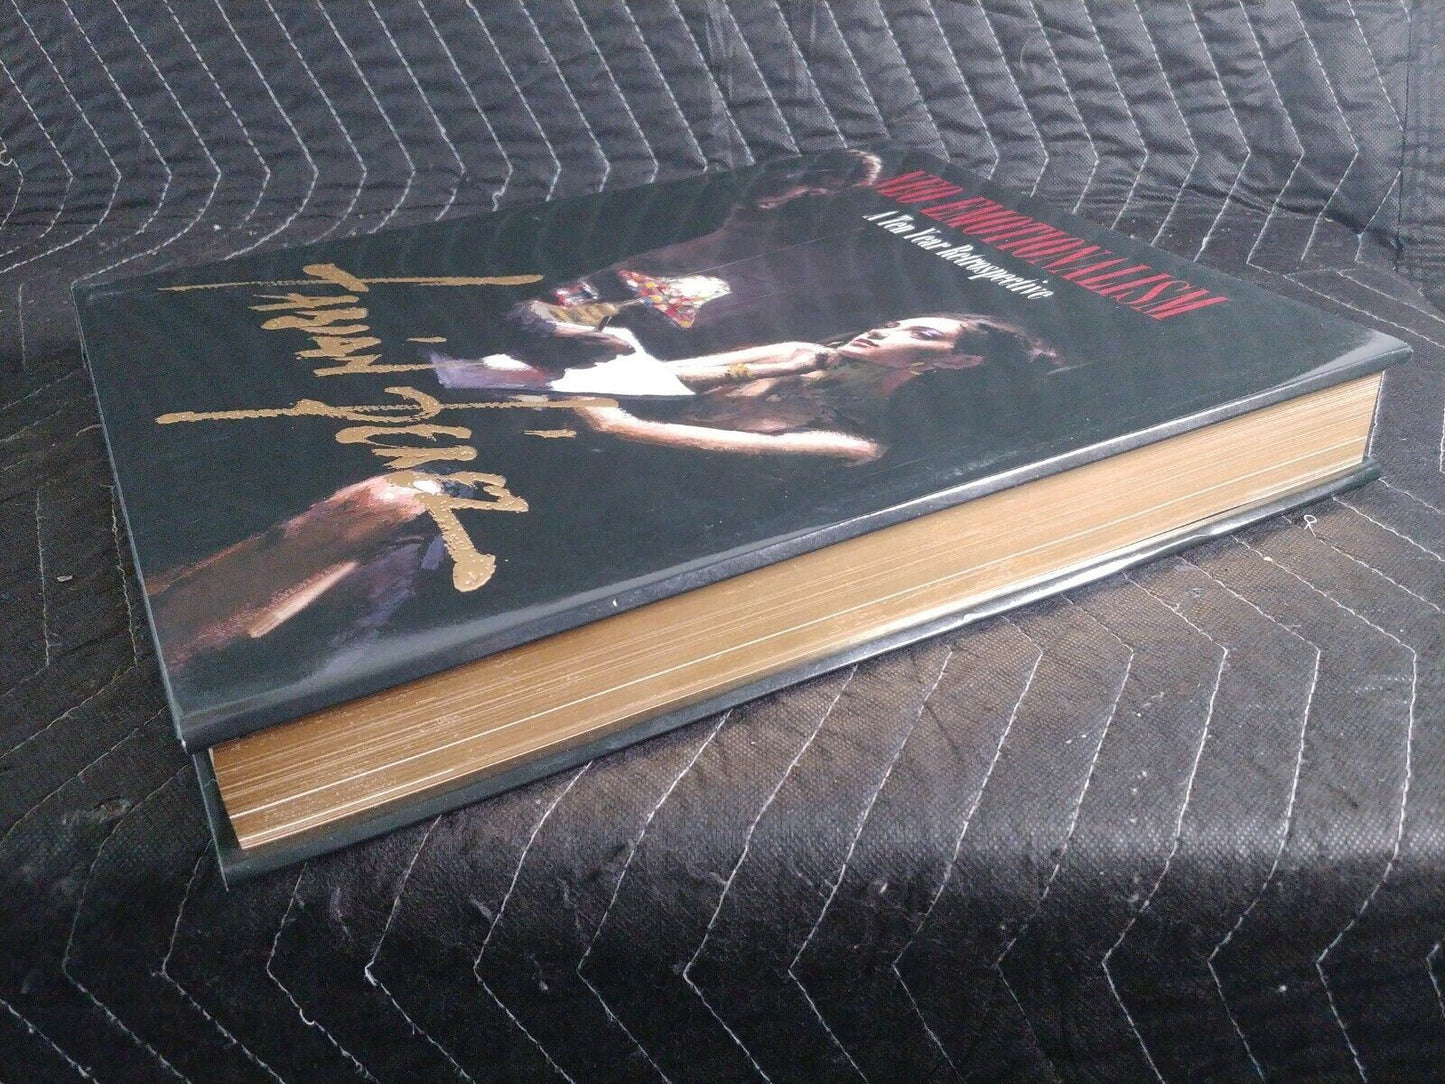 Deluxe Neo Emotionalism Fabian Perez Art Book Signed by Publicist - Gold Gilded